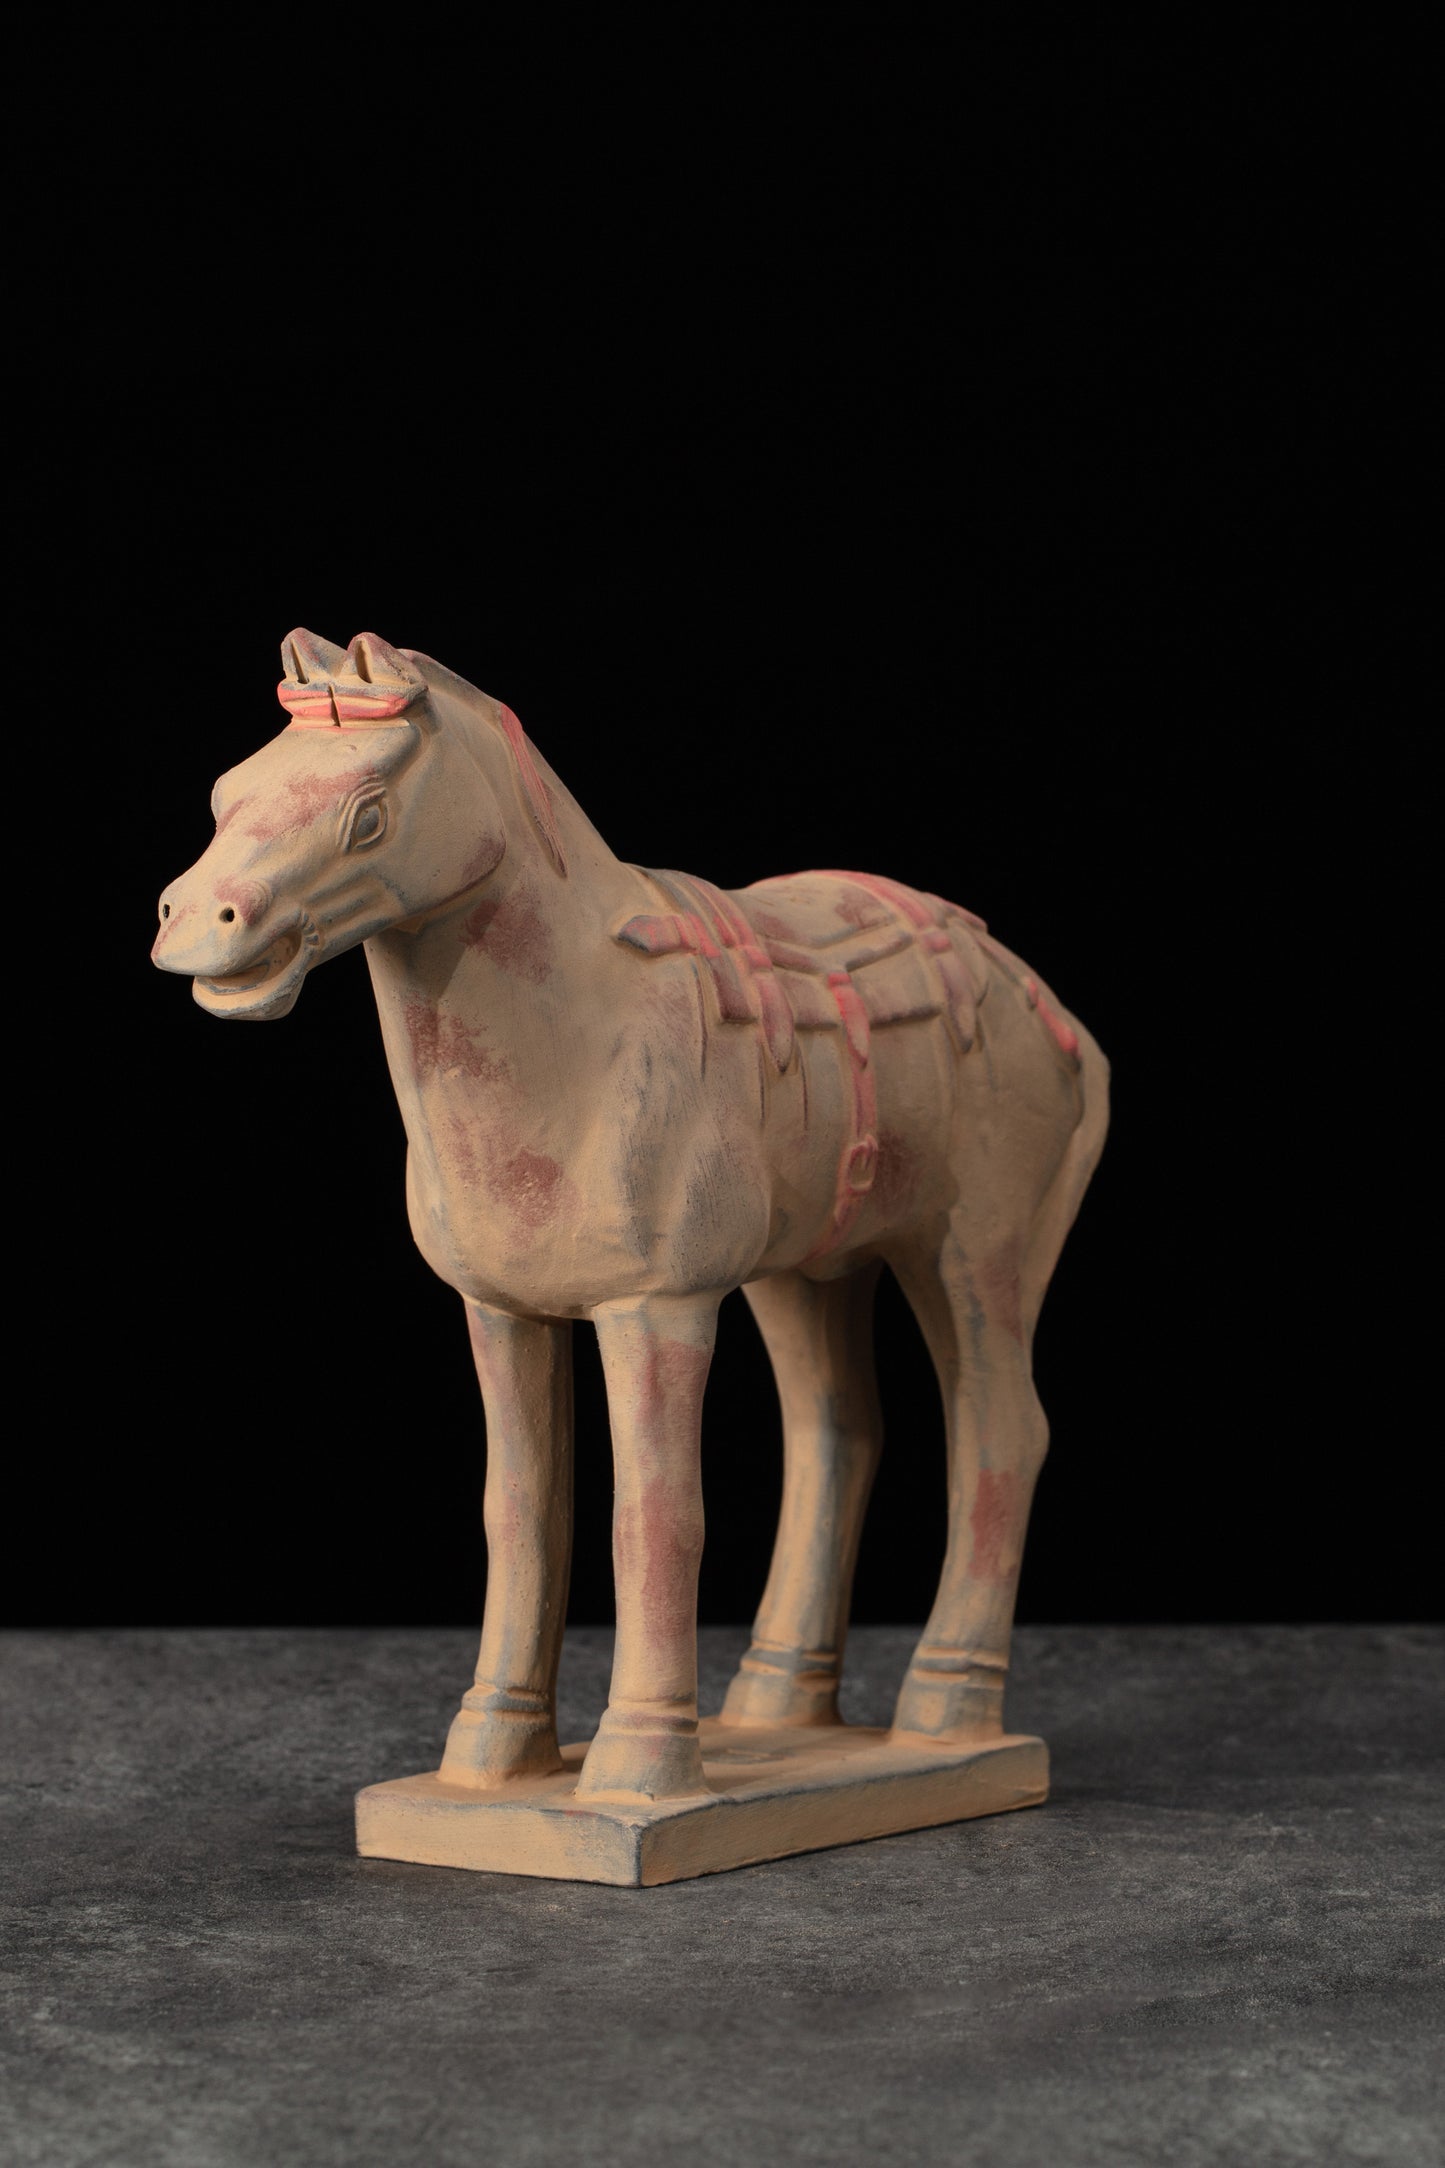 20CM Painted Horse - CLAYARMY -Profile shot emphasizing the majestic posture and proportions of our 20CM Clayarmy Terracotta Painted Horse.